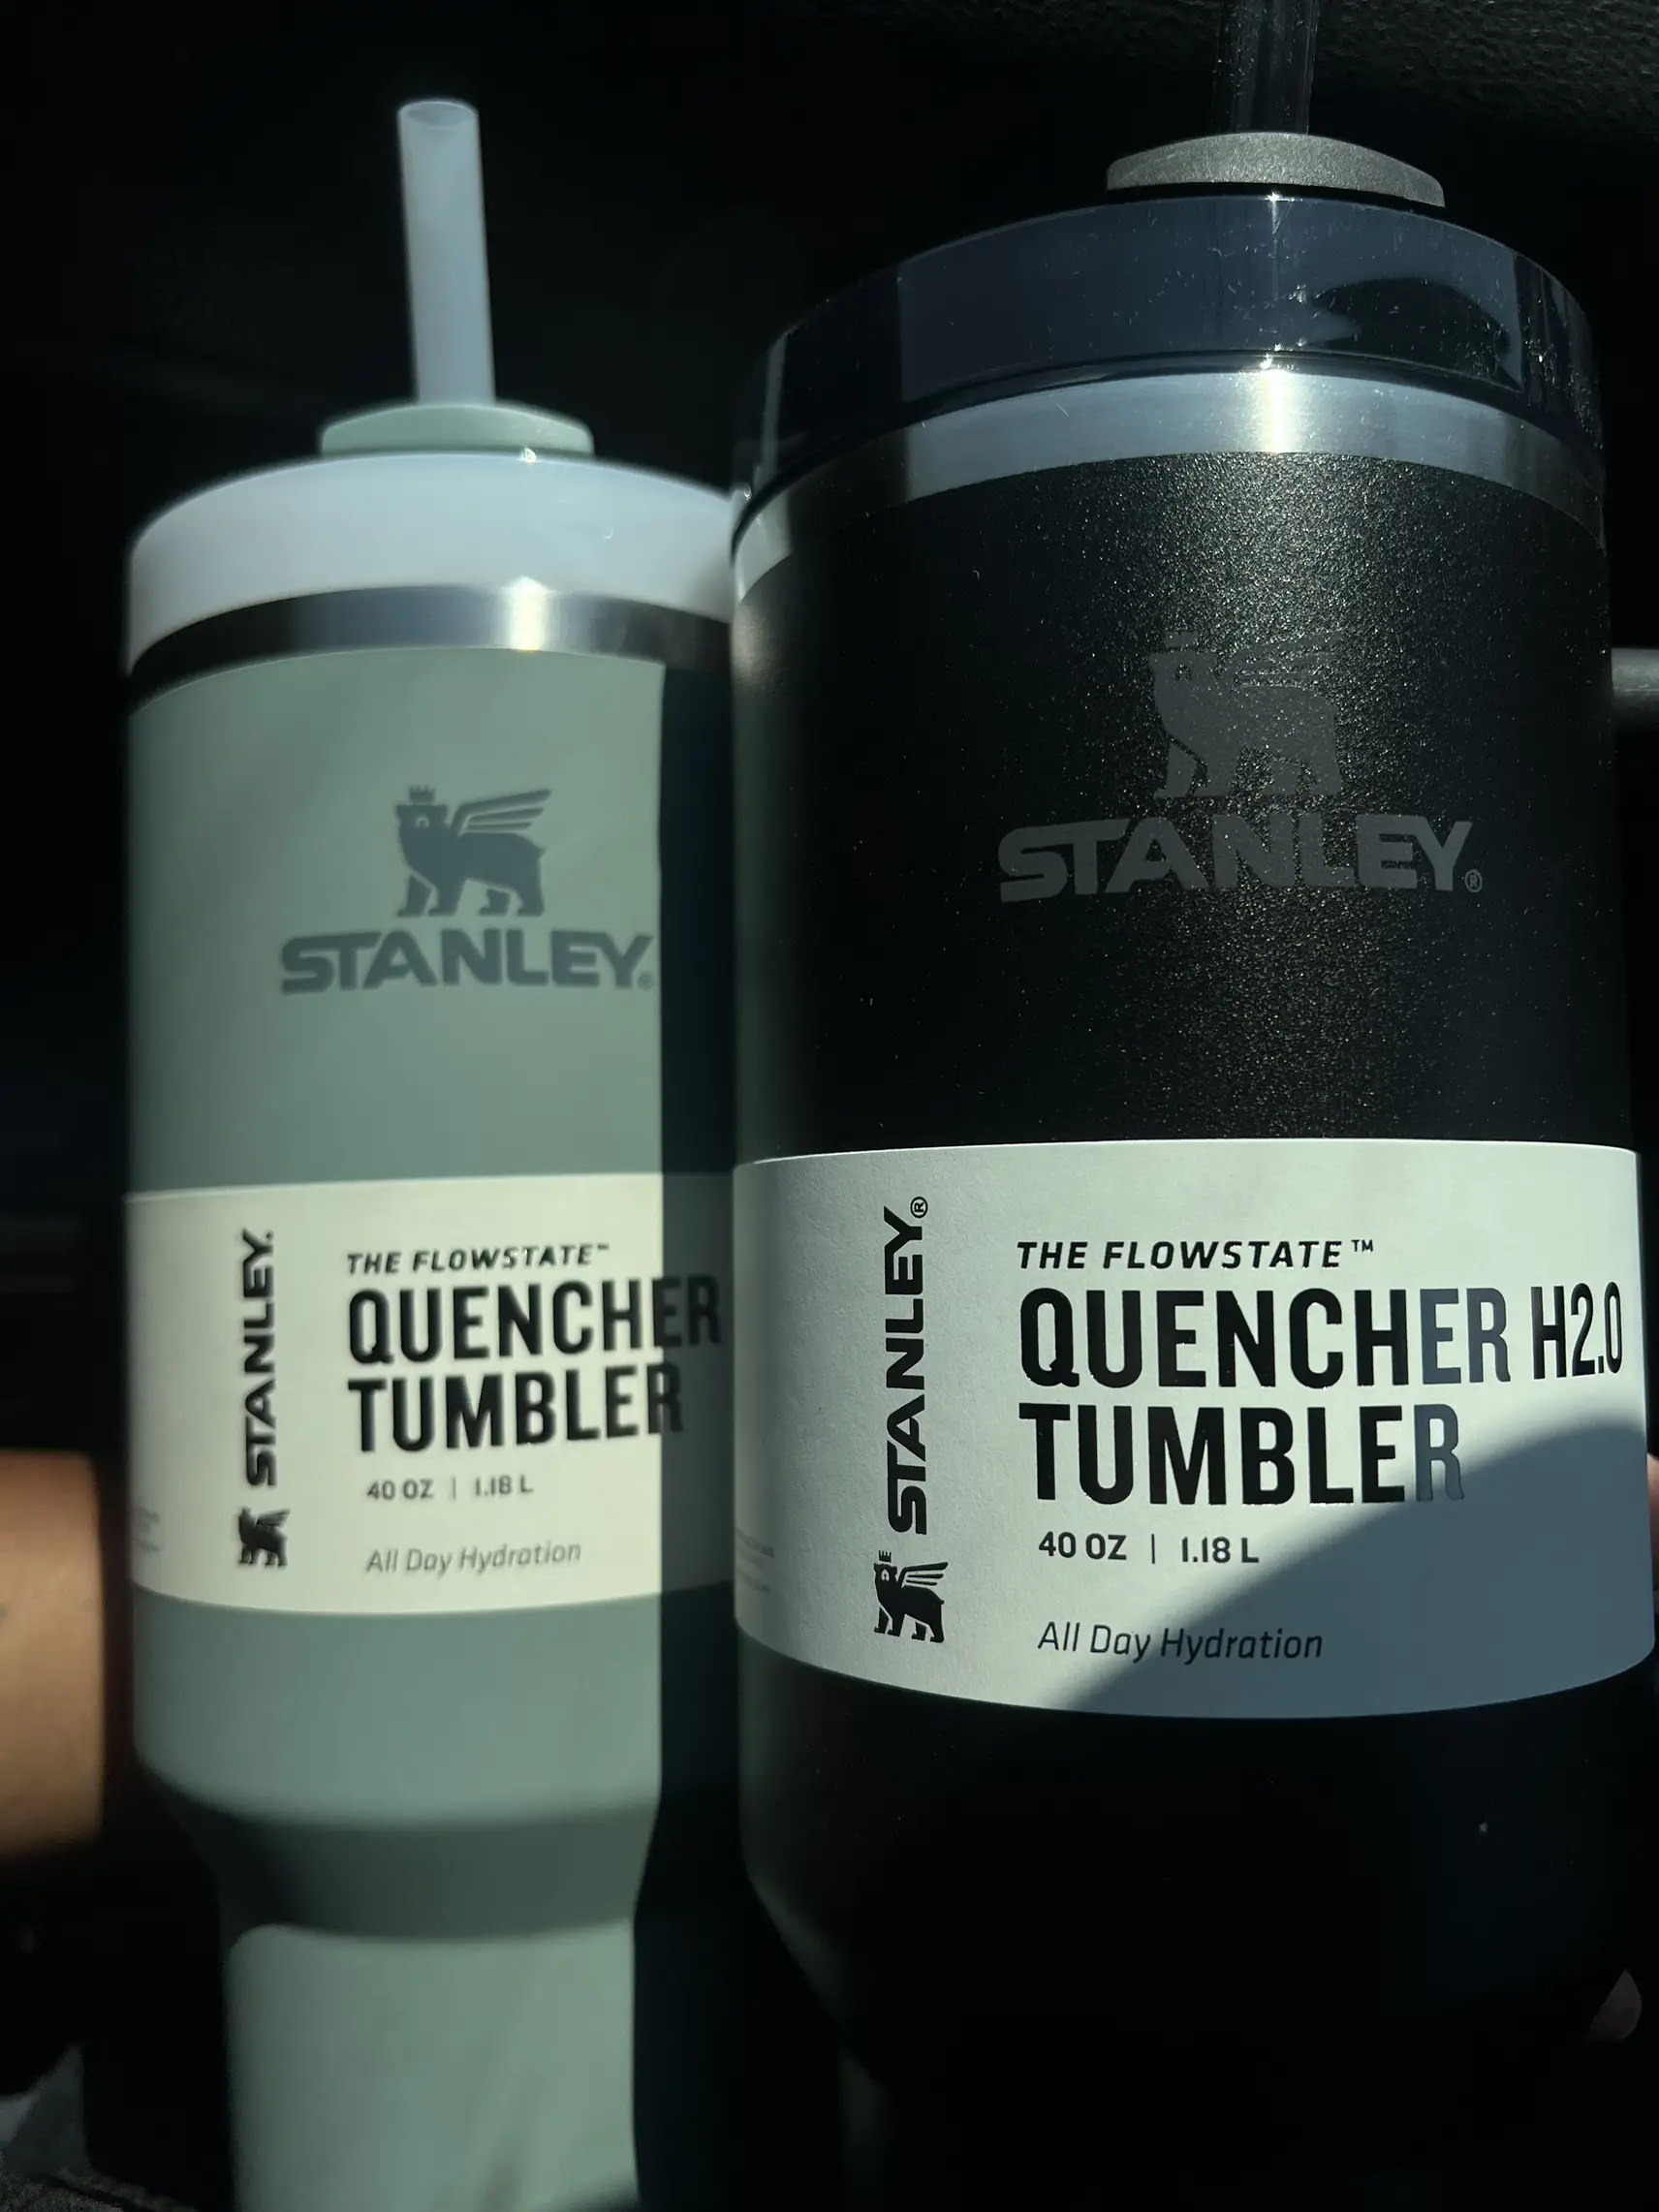 It took half an hour to fill it up tho #stanleytumbler